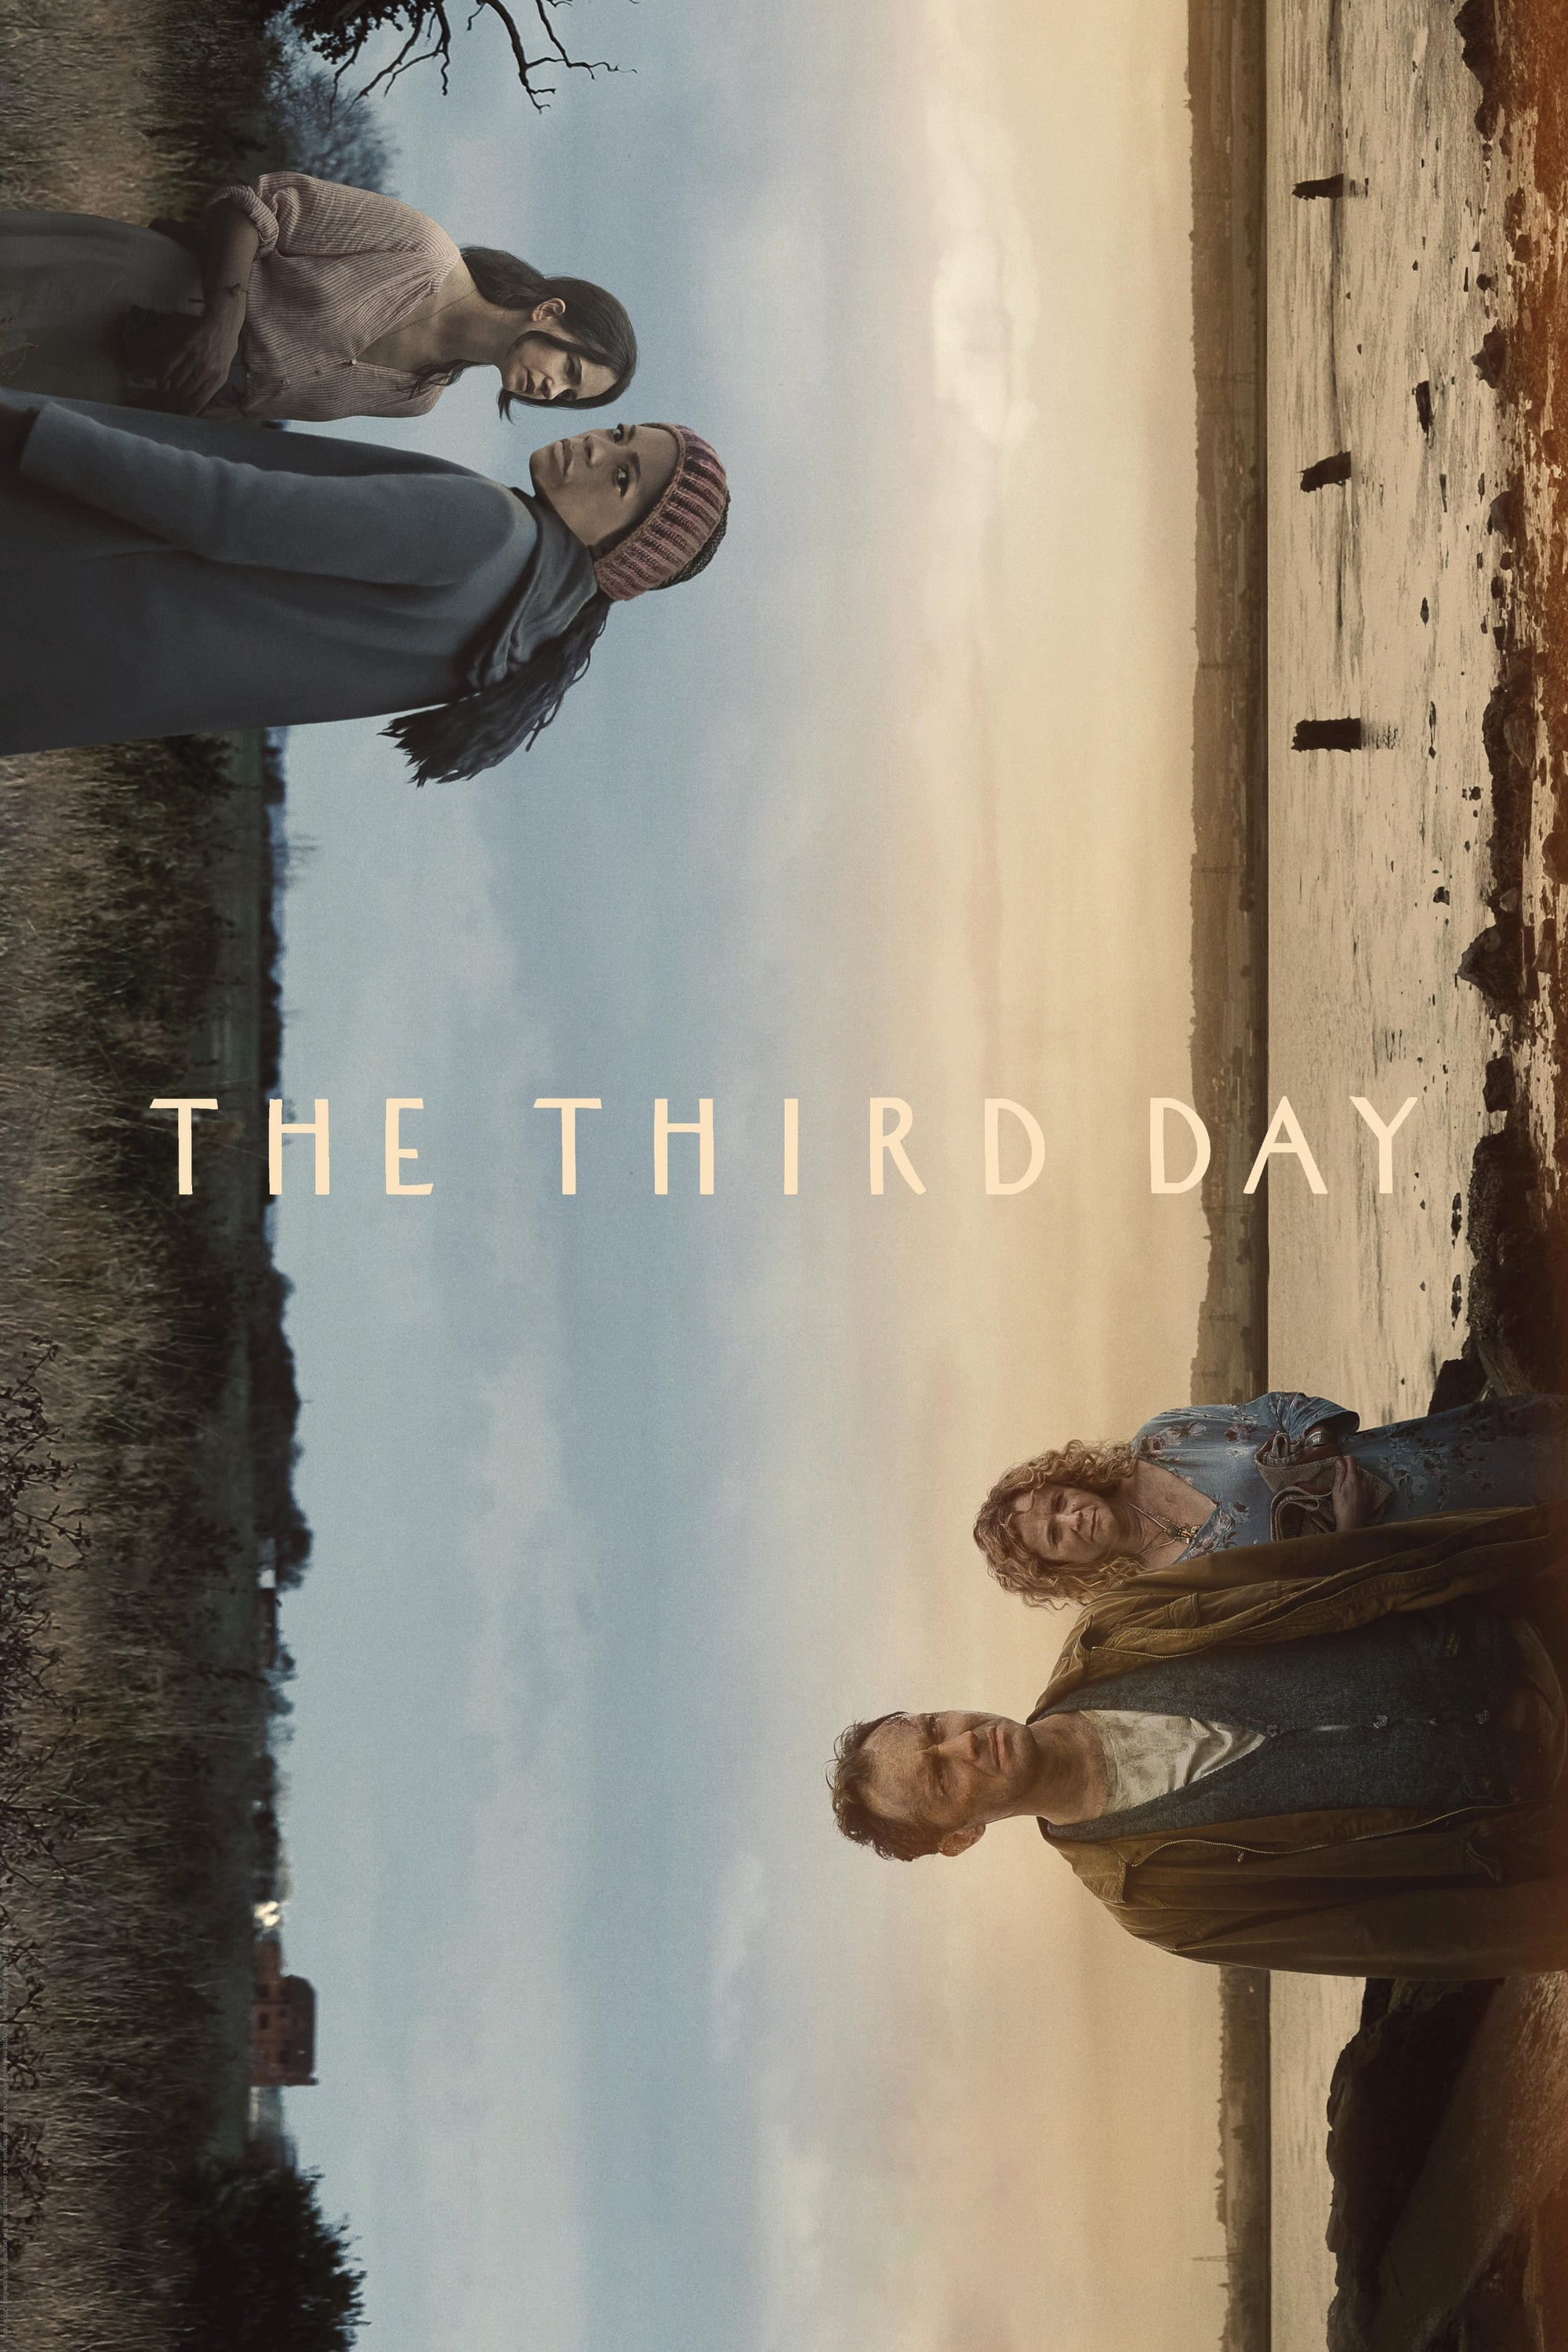 The Third Day rating